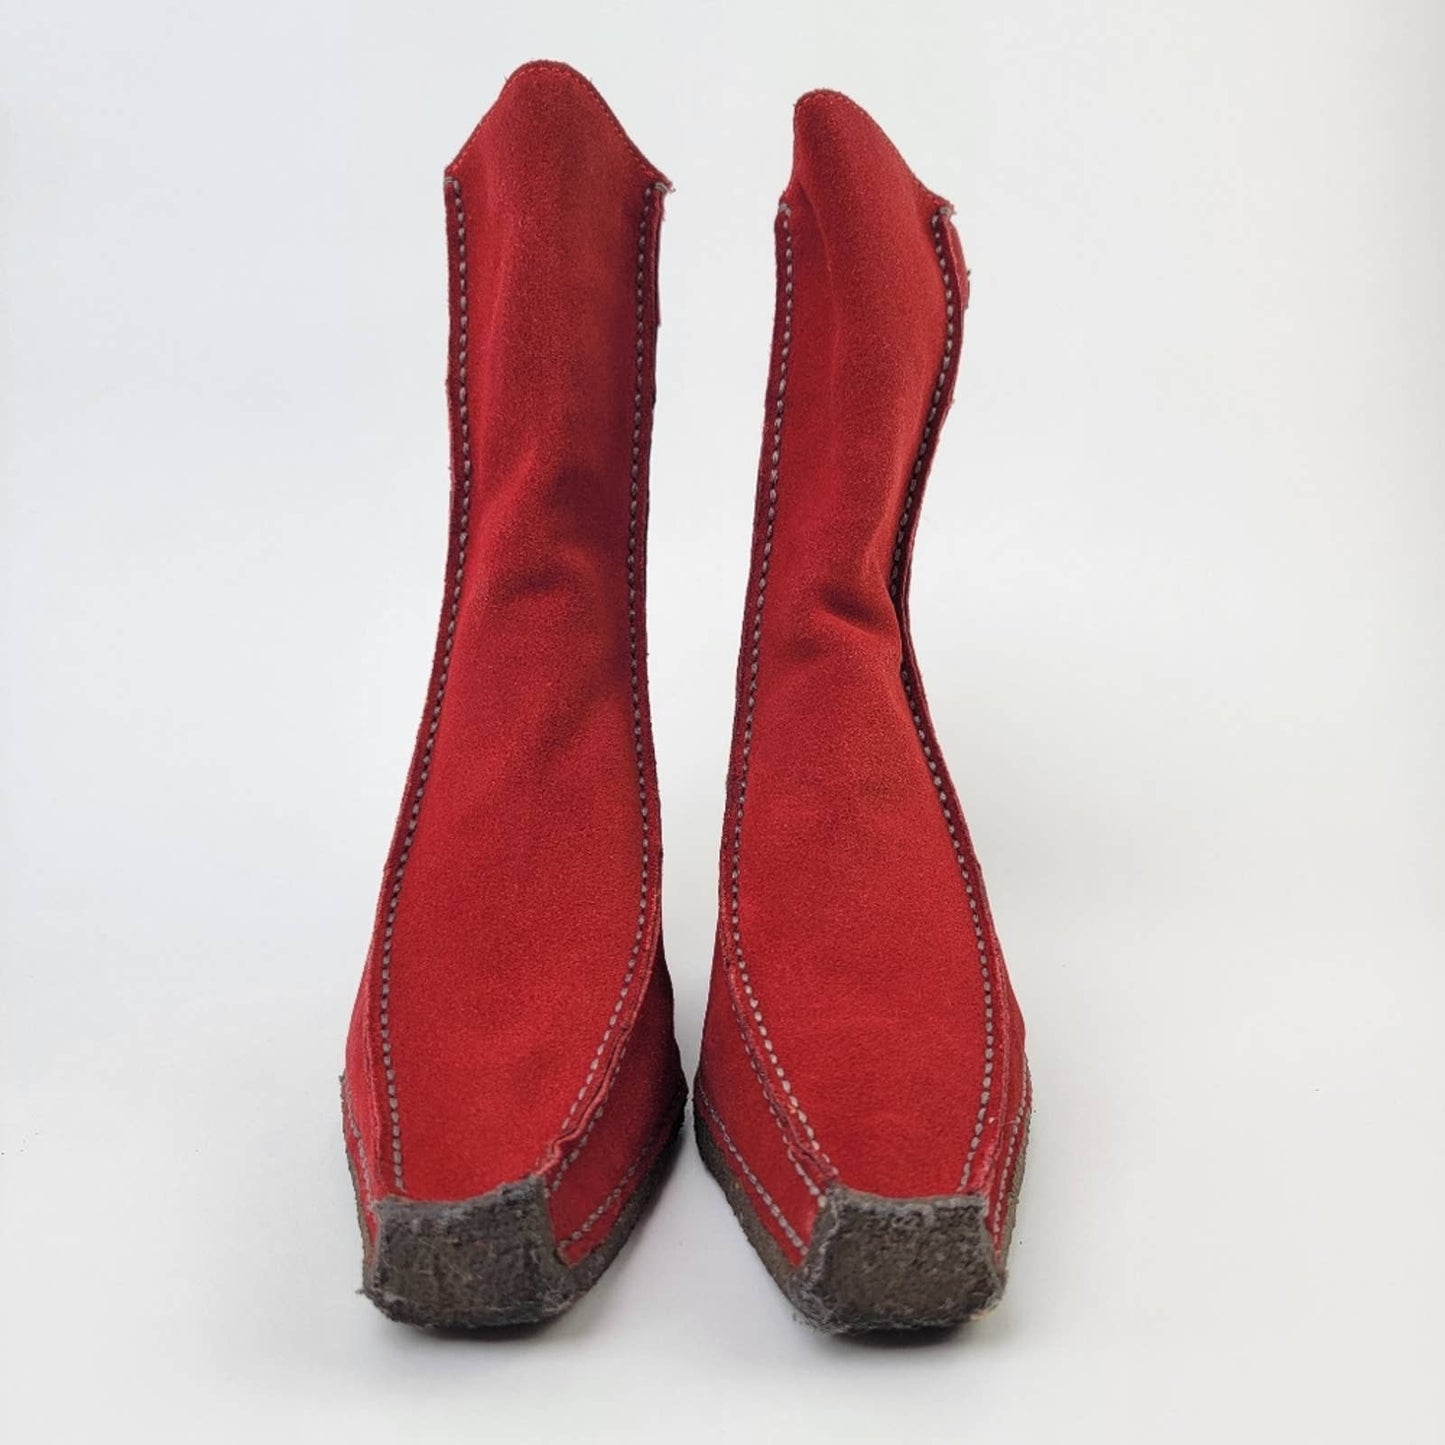 BRONX Red Suede Leather Slip On Snipped Toe Chelsea Wedge Boots - 9